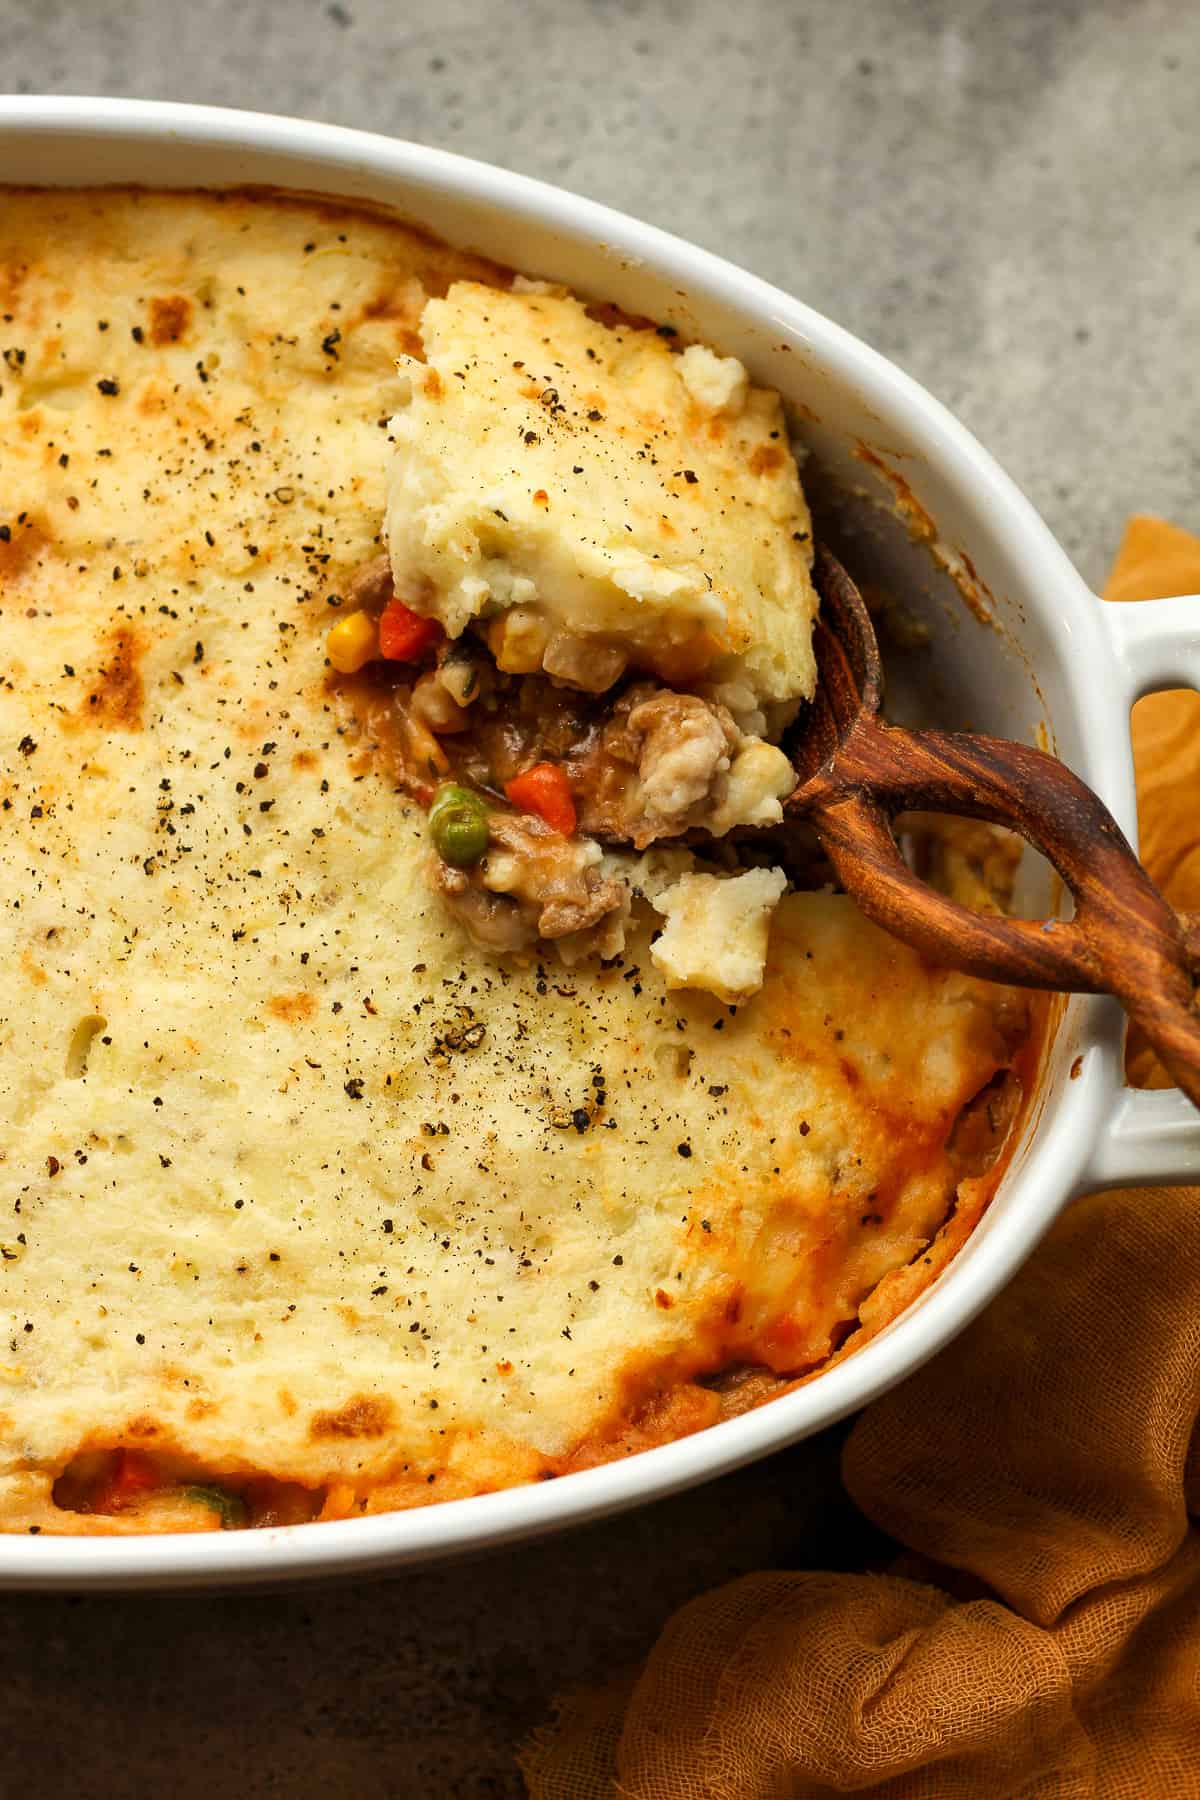 A wooden spoon with some shepherd's pie.